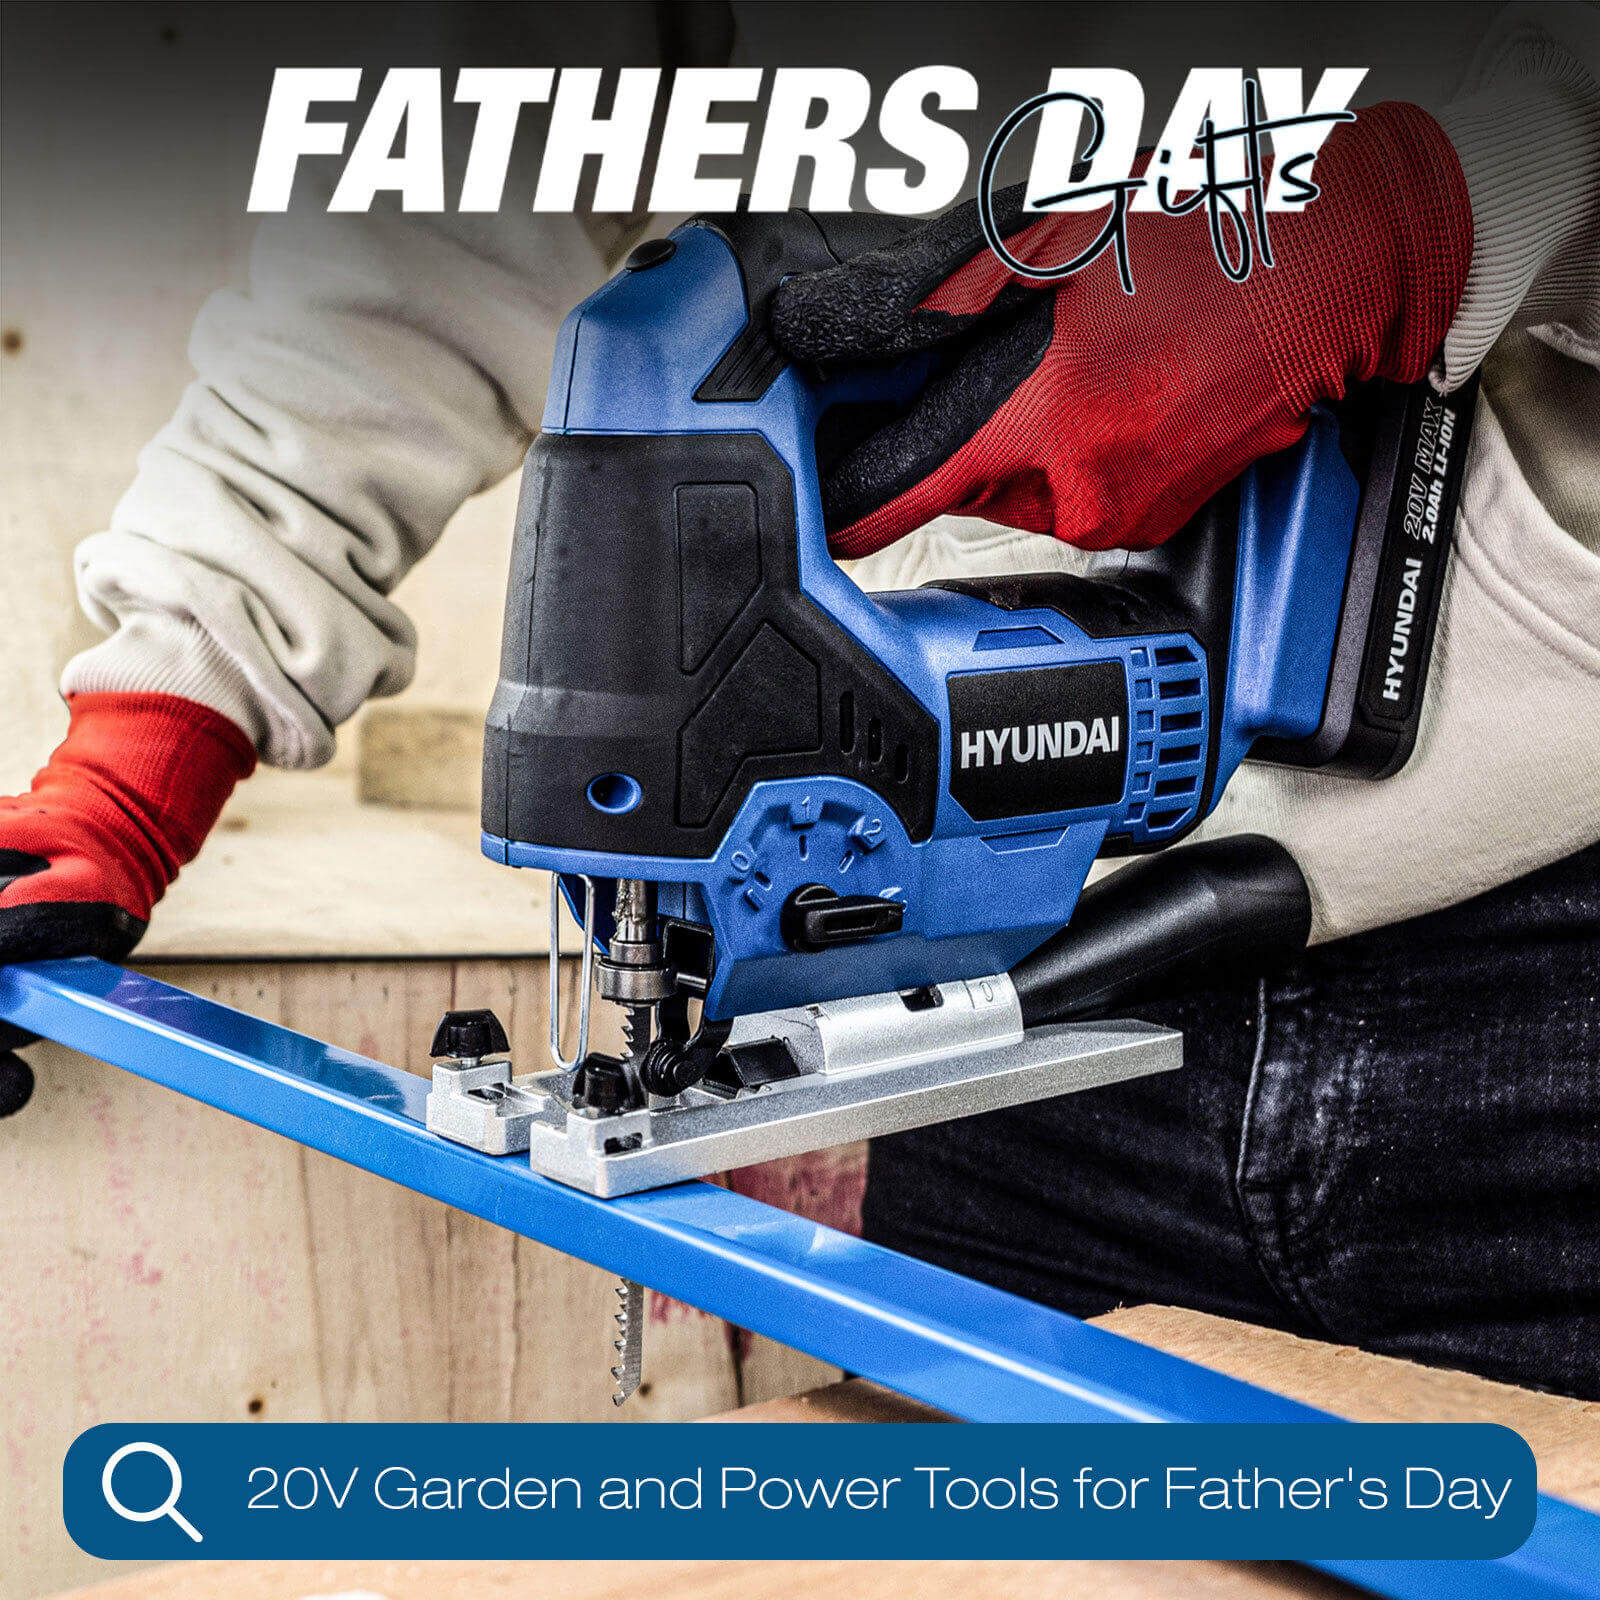 Hyundai 20V Tools: Father's Day Gift for Gardeners and DIY Dads